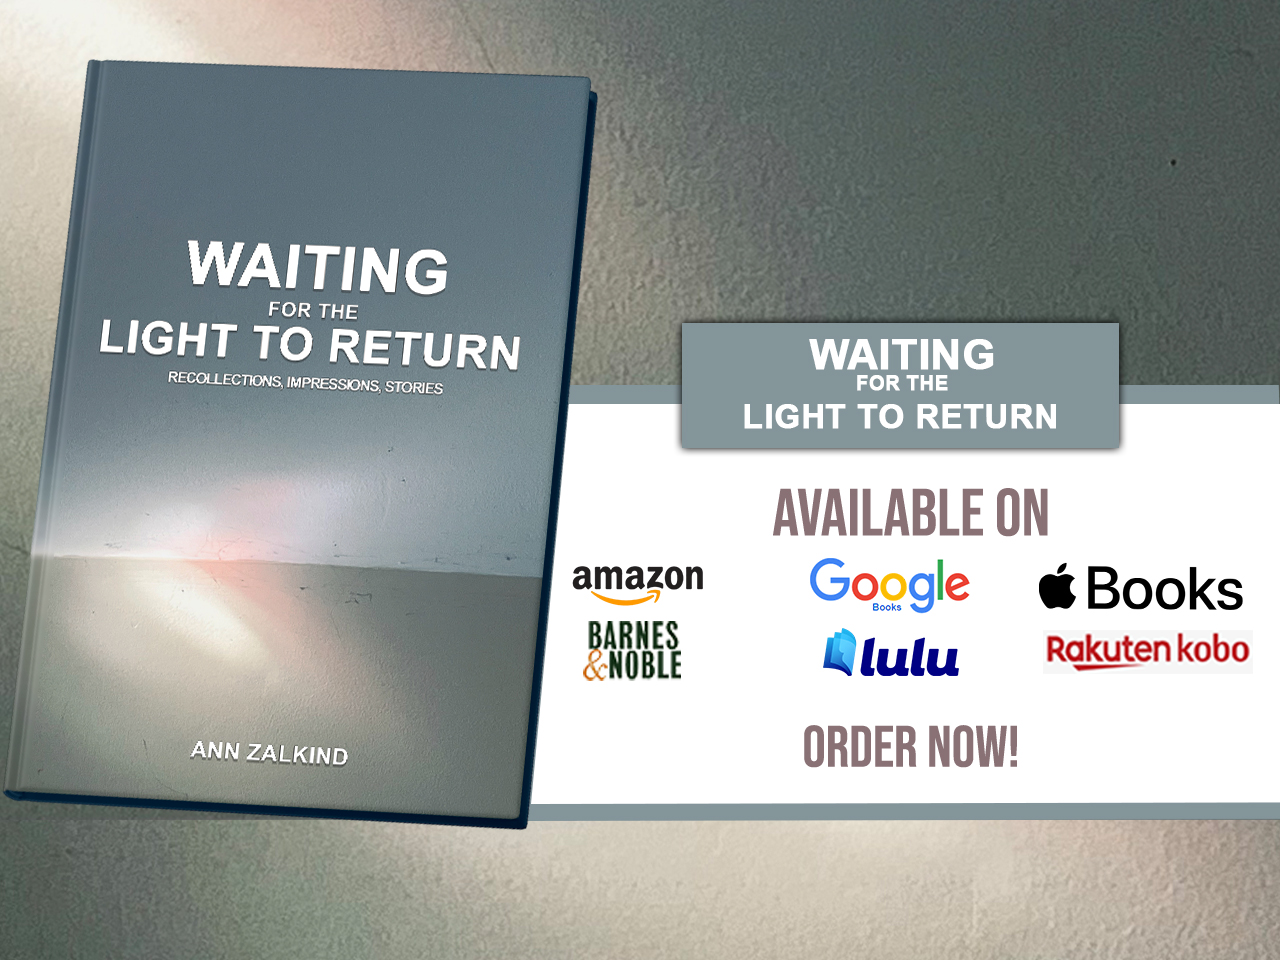 Introducing "Waiting For The Light To Return" By Ann Zalkind